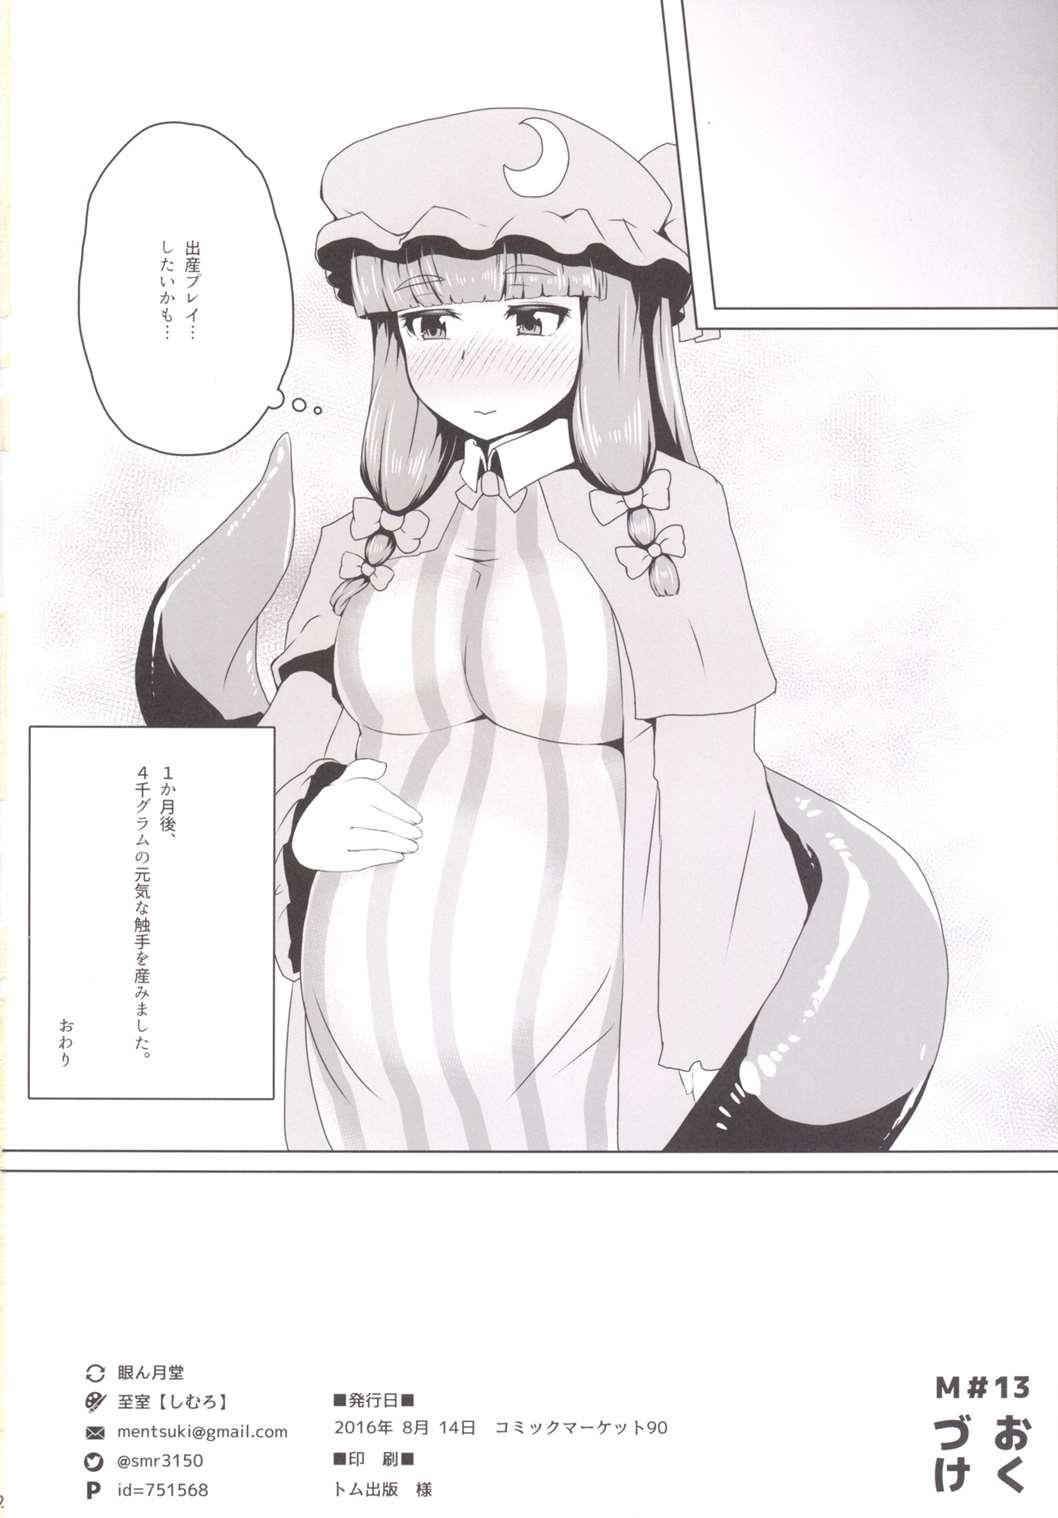 White Girl Love Me Tender - Touhou project Making Love Porn - Page 21